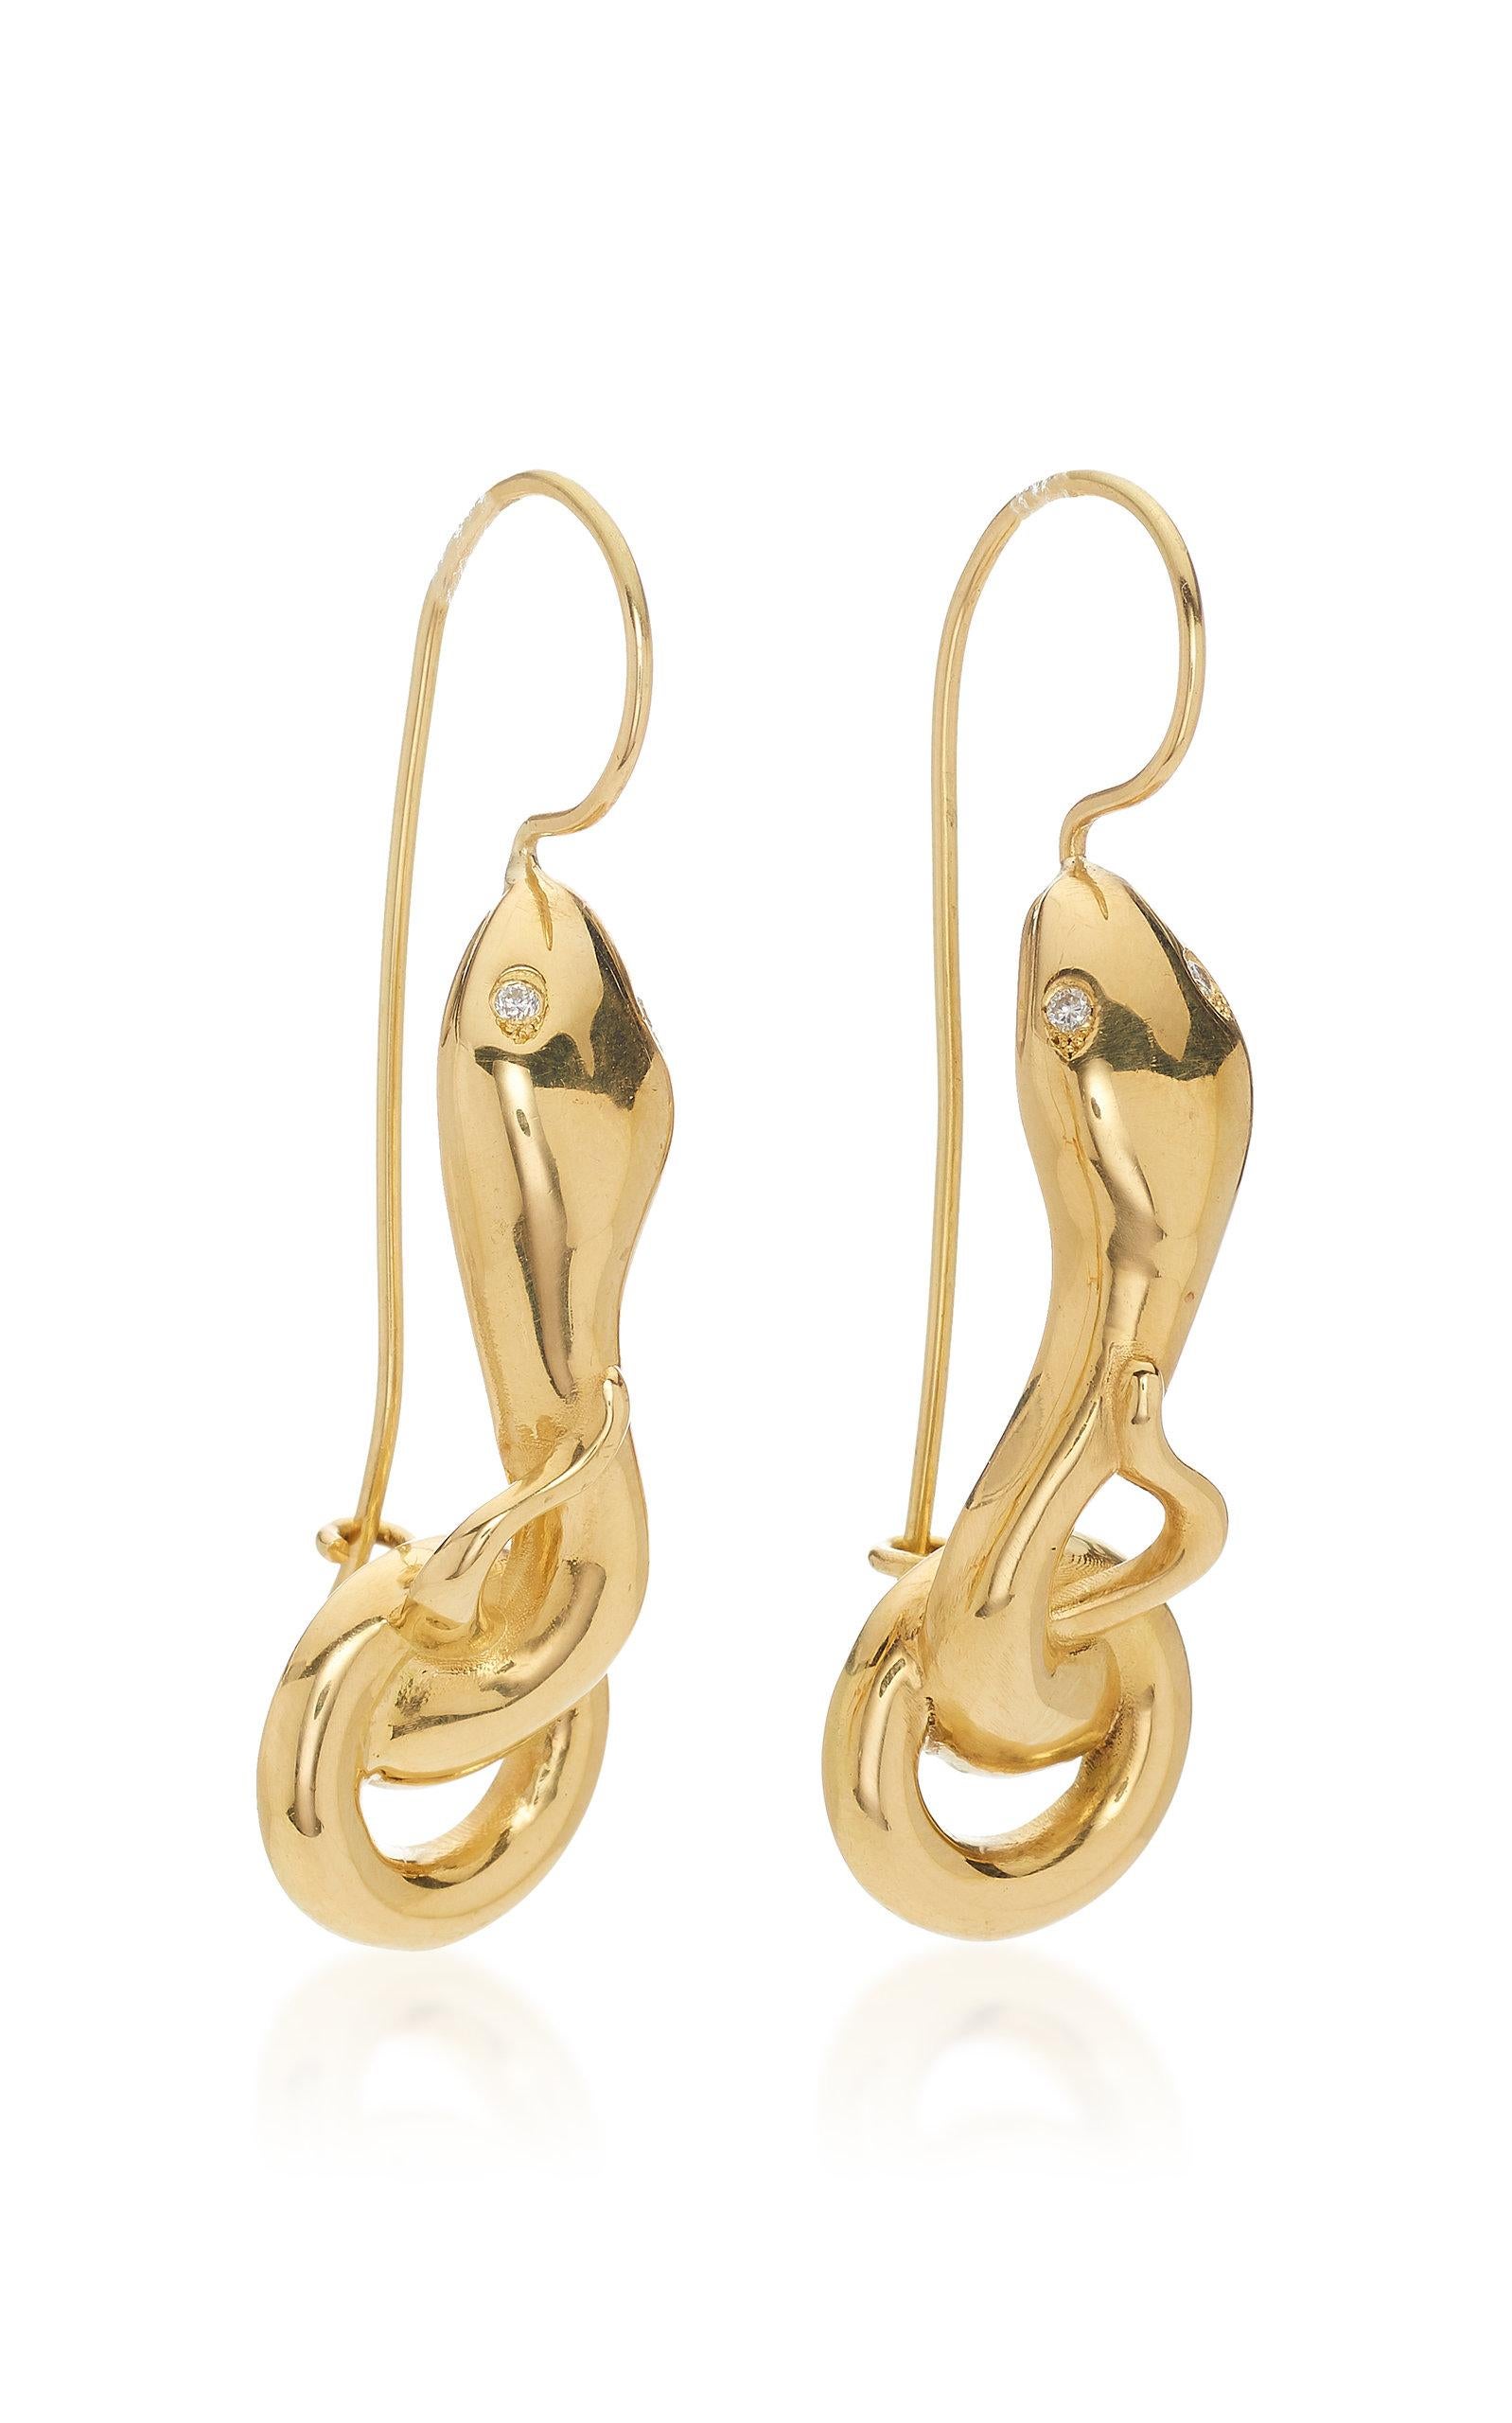 Gold snake earrings with 0.30ct diamond eyes designed by Christina Alexiou. 
This pair of earrings is crafted with 18k yellow gold and has 0.80ct diamond eyes. 
As Christina Alexiou notes, she draws on jewellery's ancient purpose as 